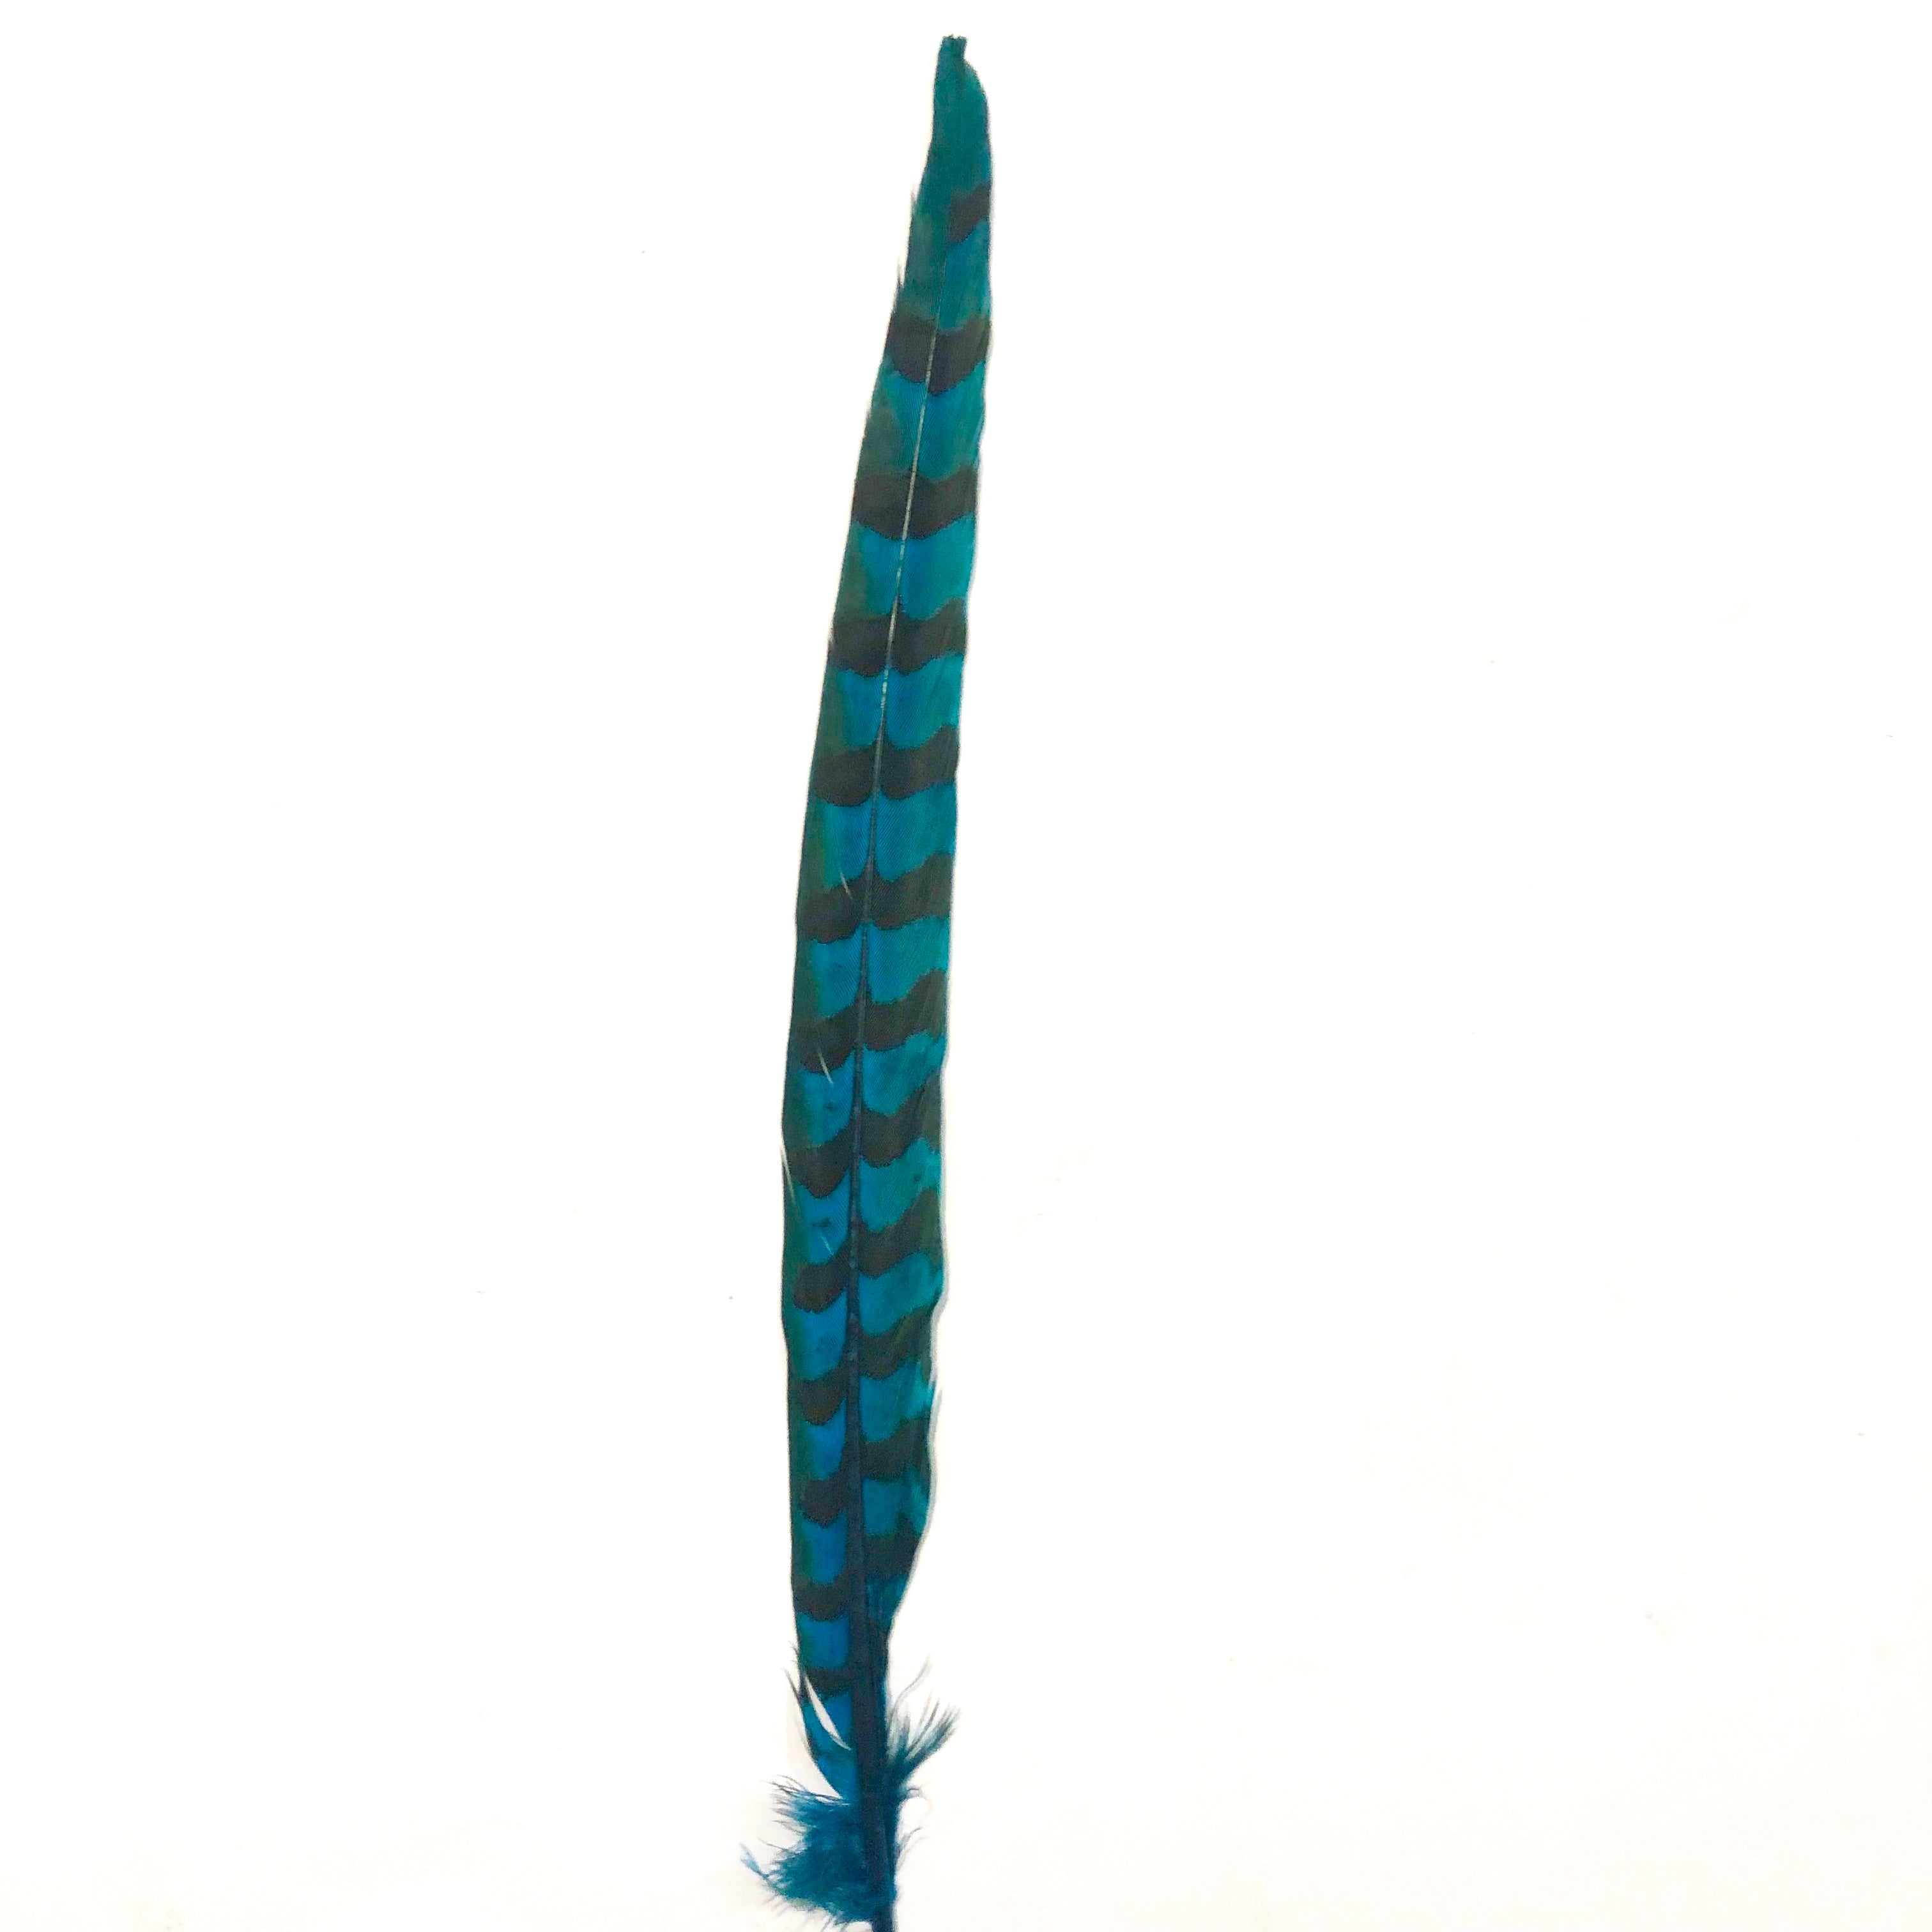 8" to 10" Reeves Pheasant Tail Feather - Turquoise ((SECONDS))